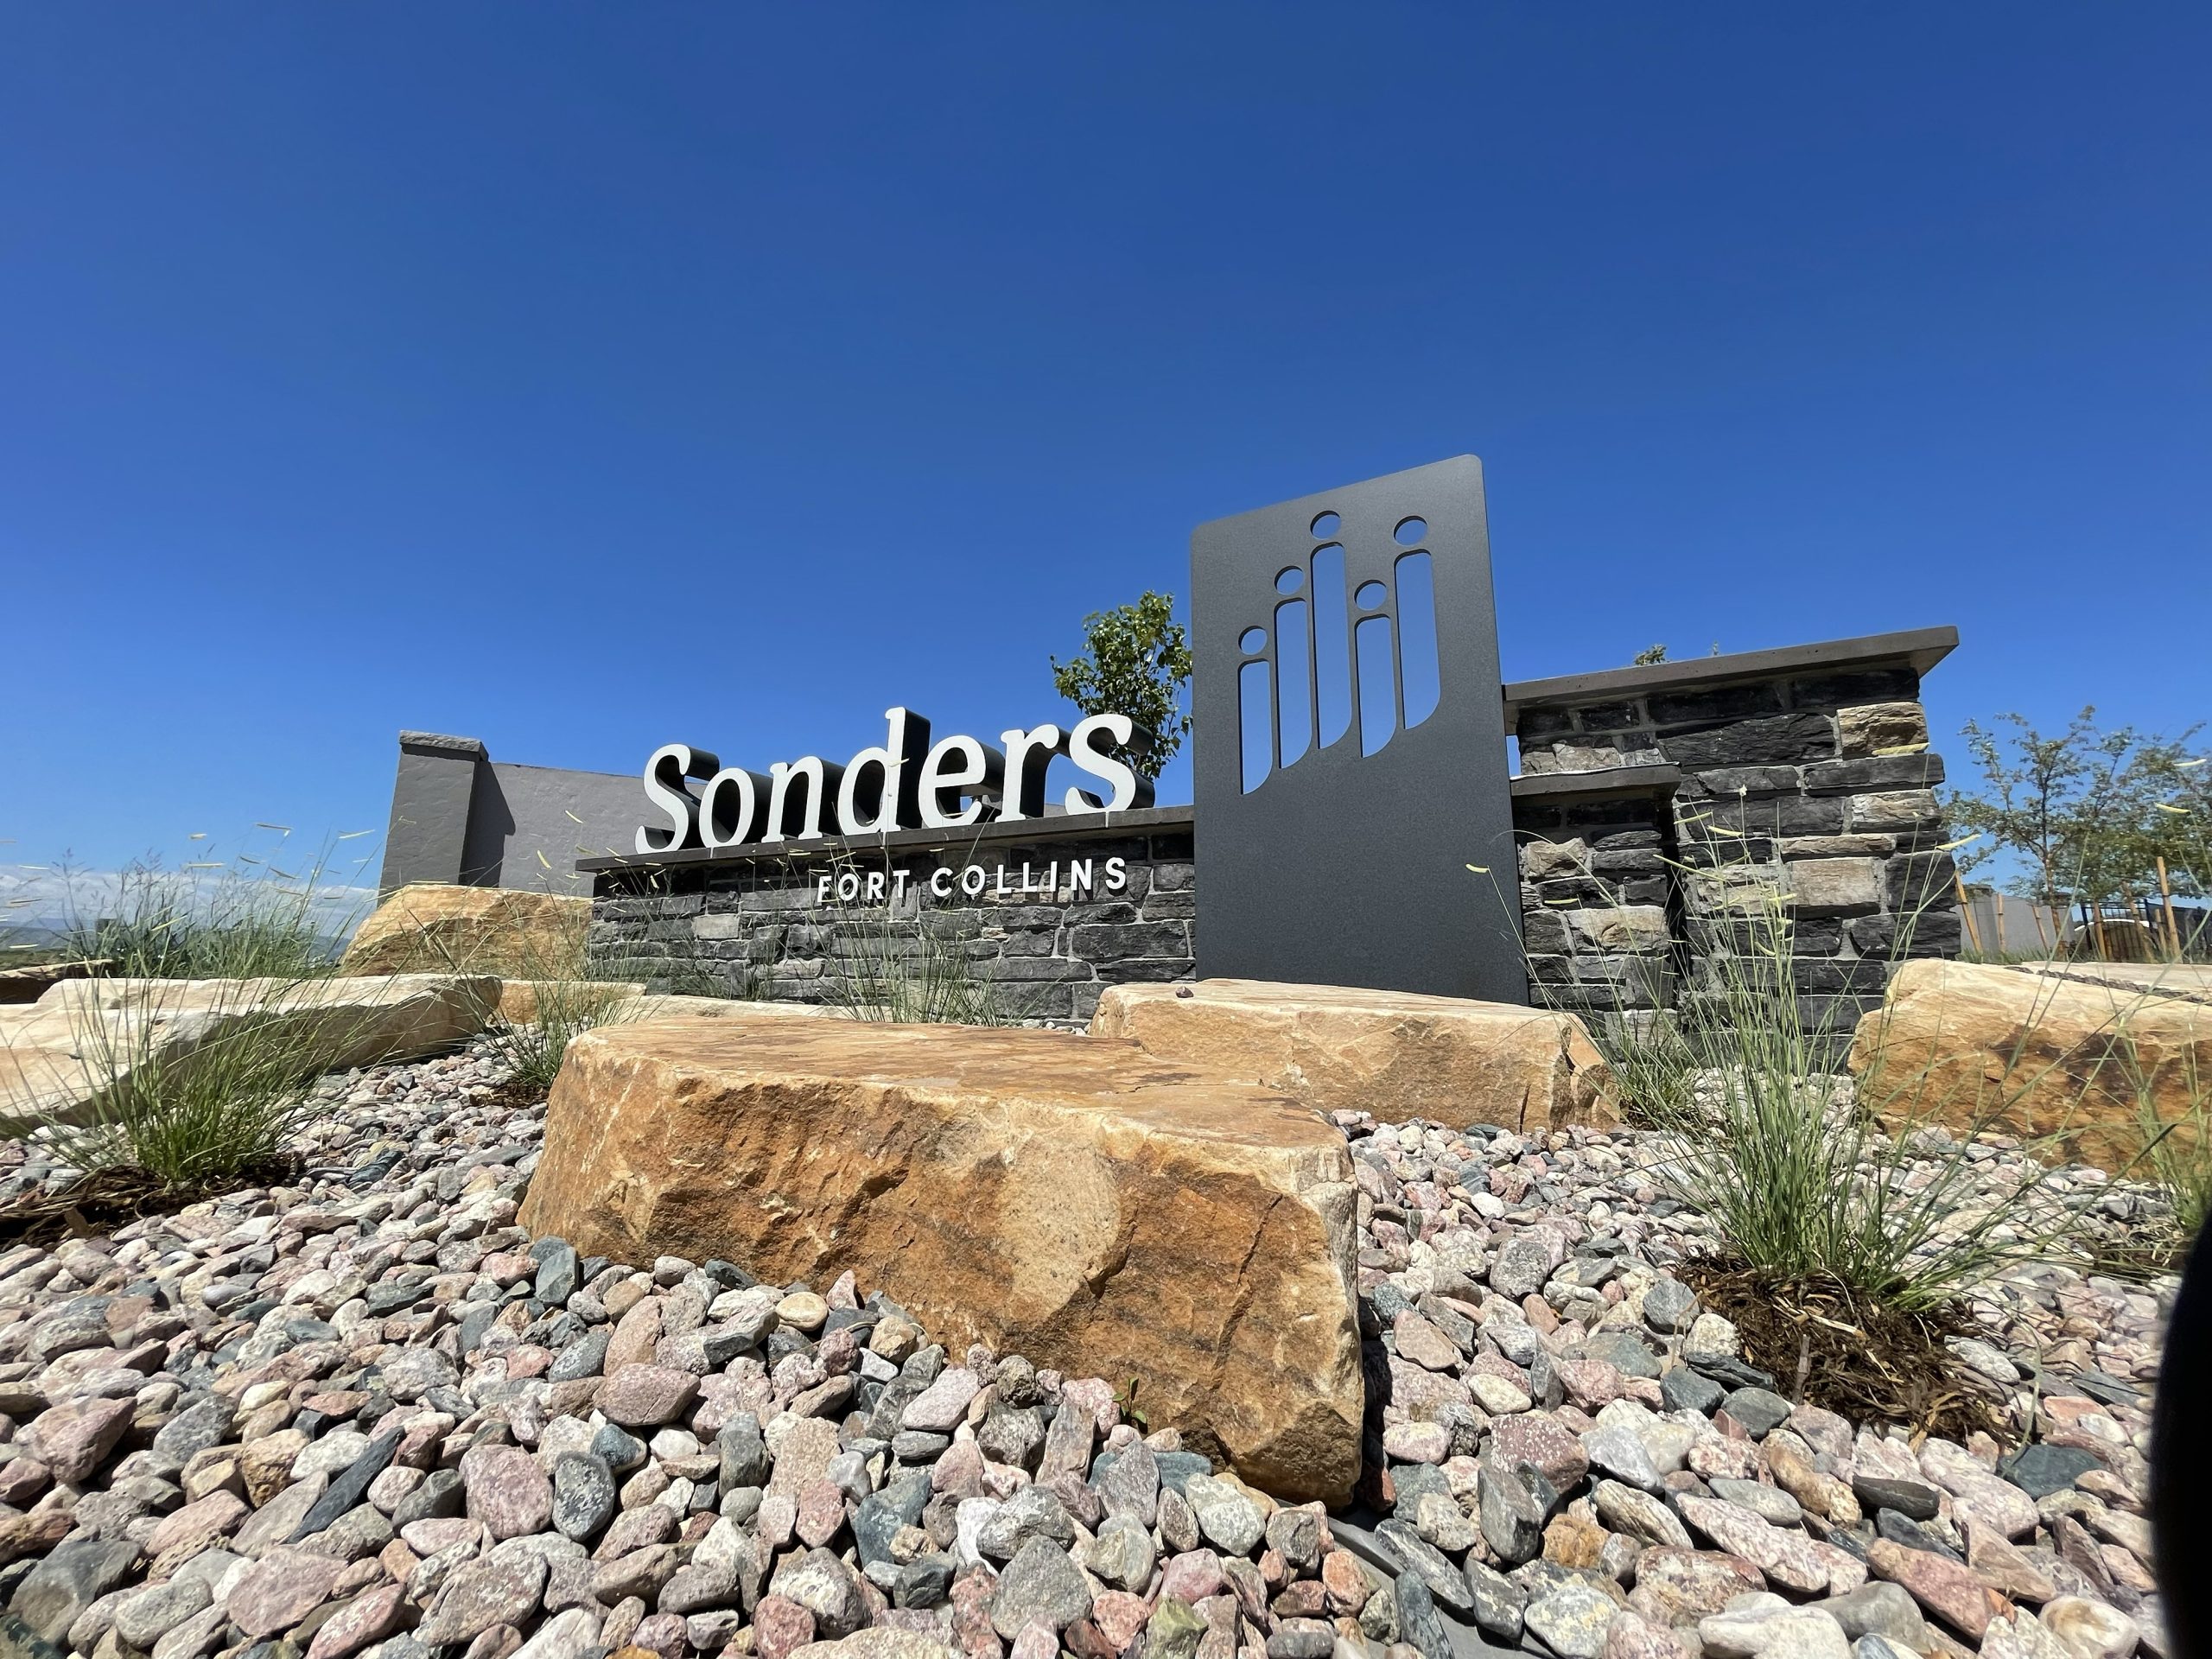 Sonders Fort Collins: A New Home Community Designed for Tomorrow – and Beyond